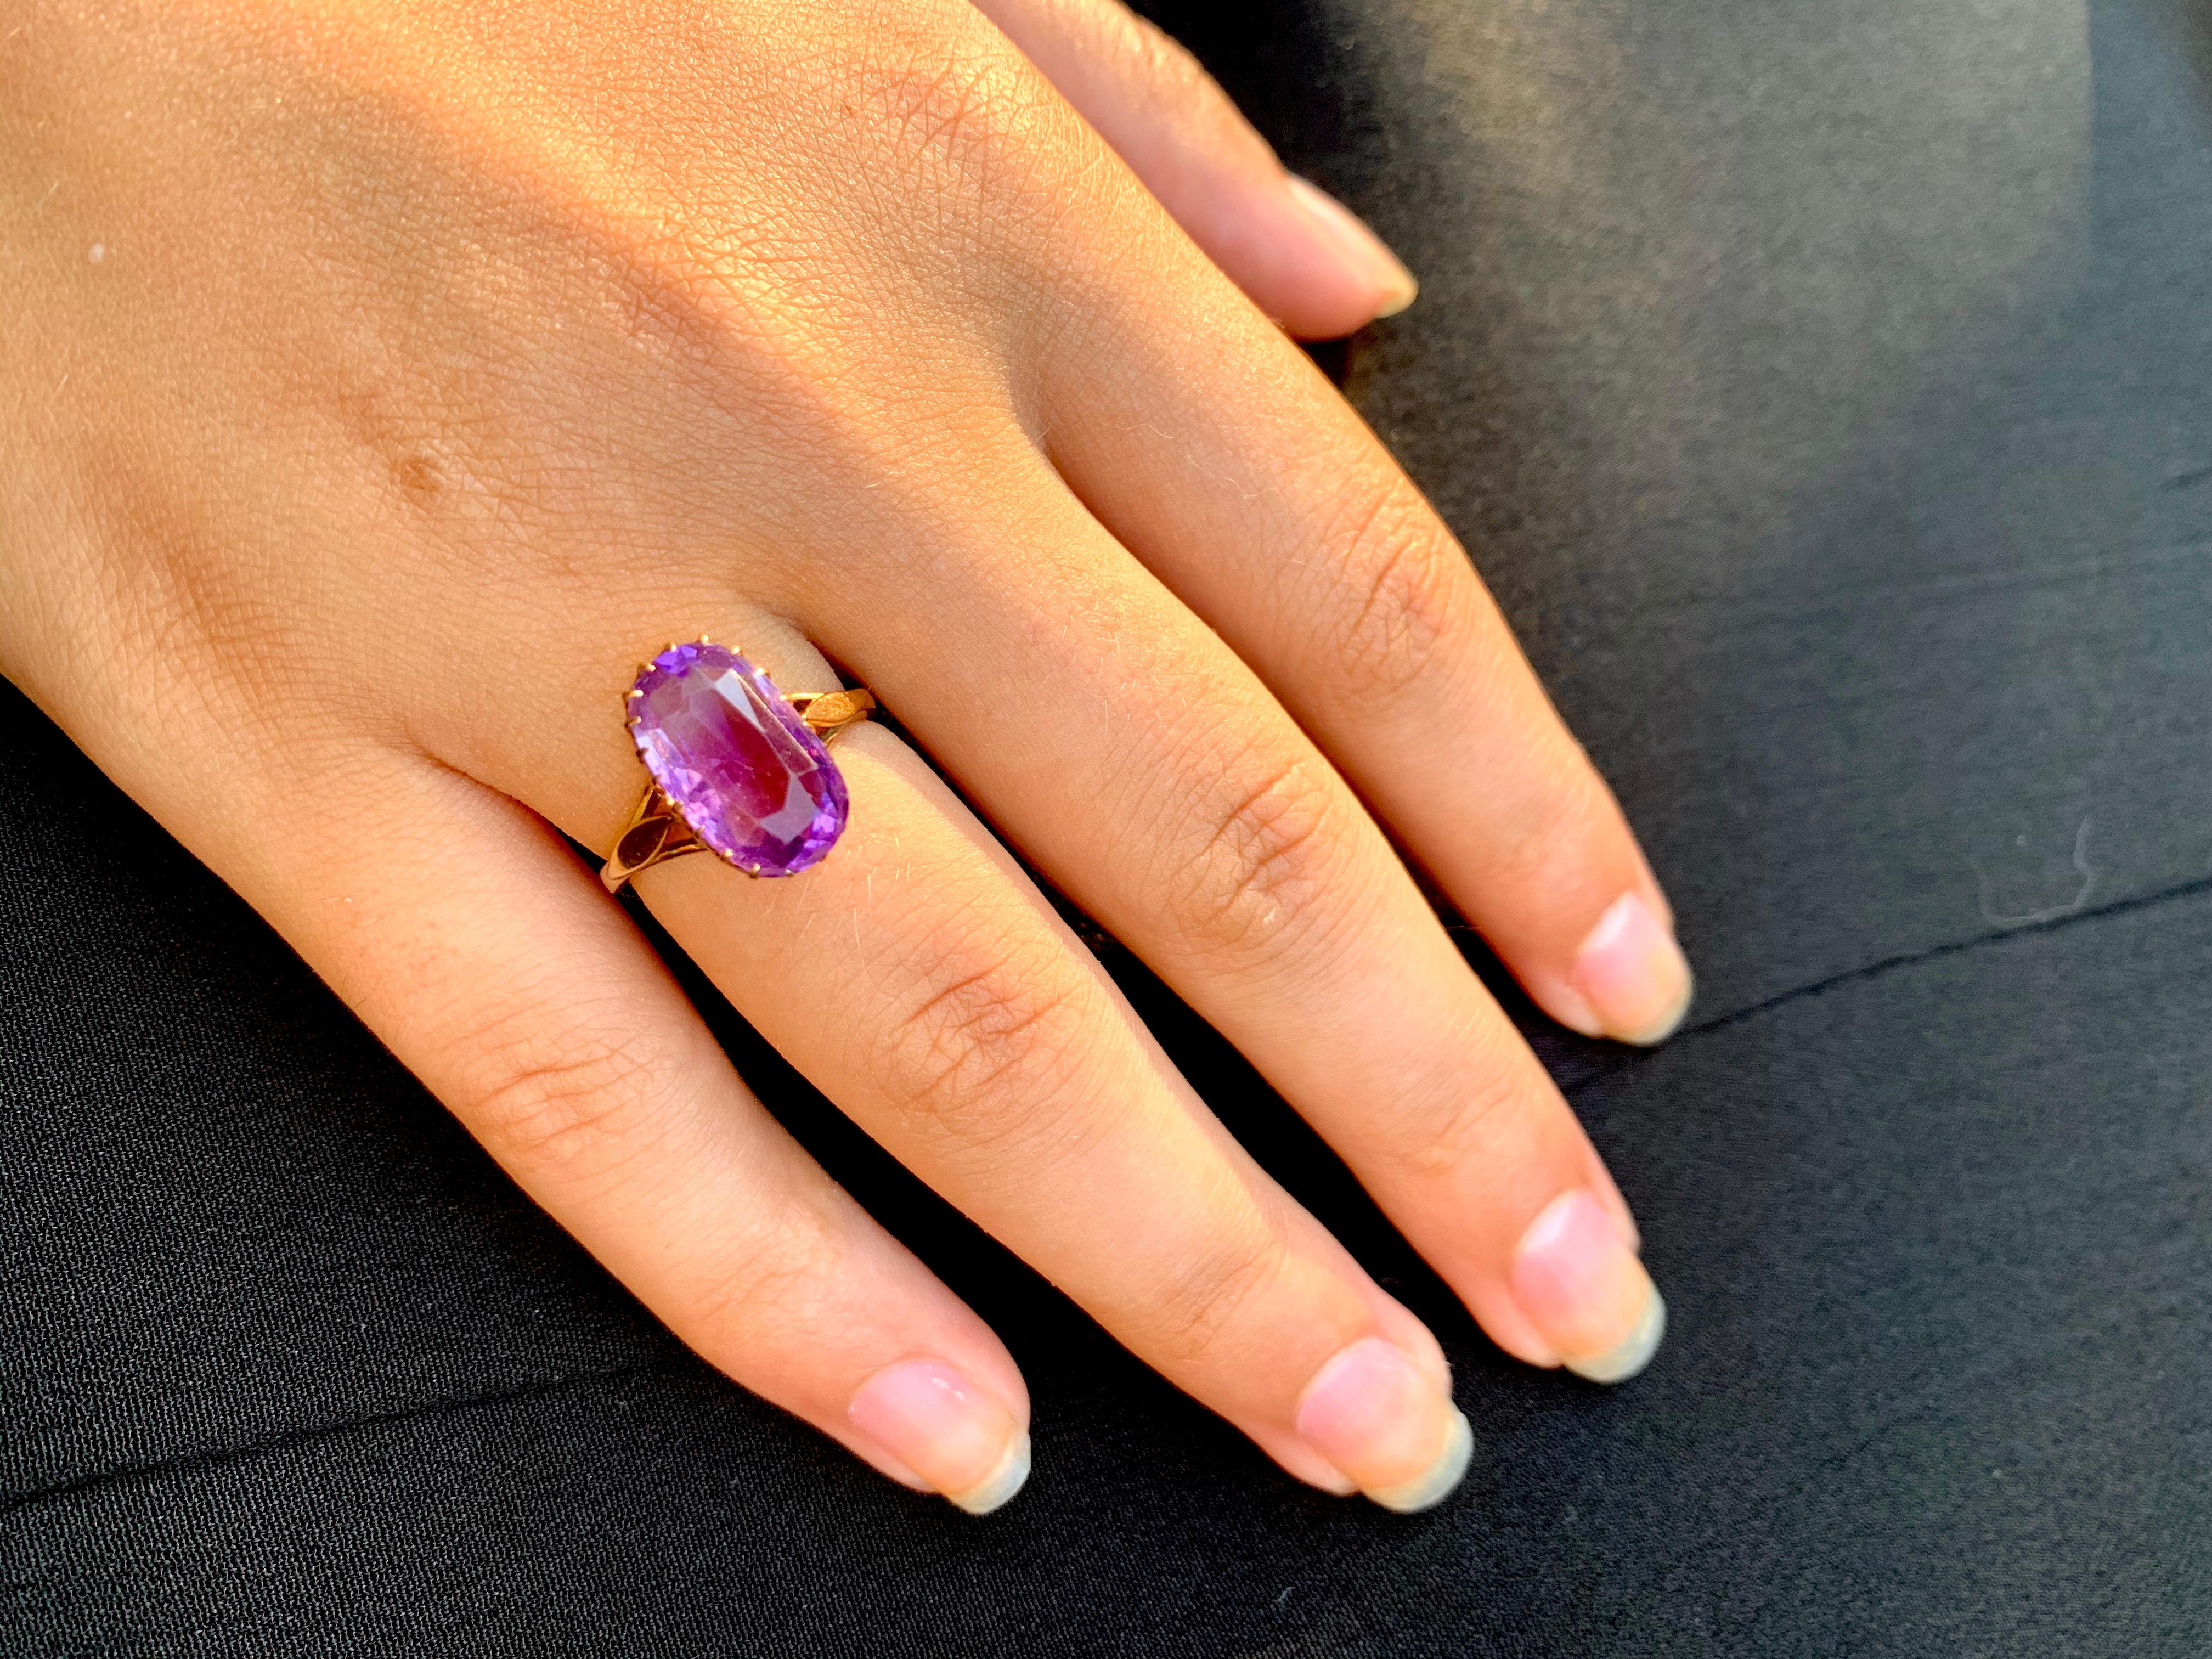 Romantic, delicate Old European cut amethyst ring in a lovely crown design 14K yellow gold setting. The unusual, slightly irregular cut on the lively amethyst immediately identifies this ring as a special, early piece. The stone measures 13mm by